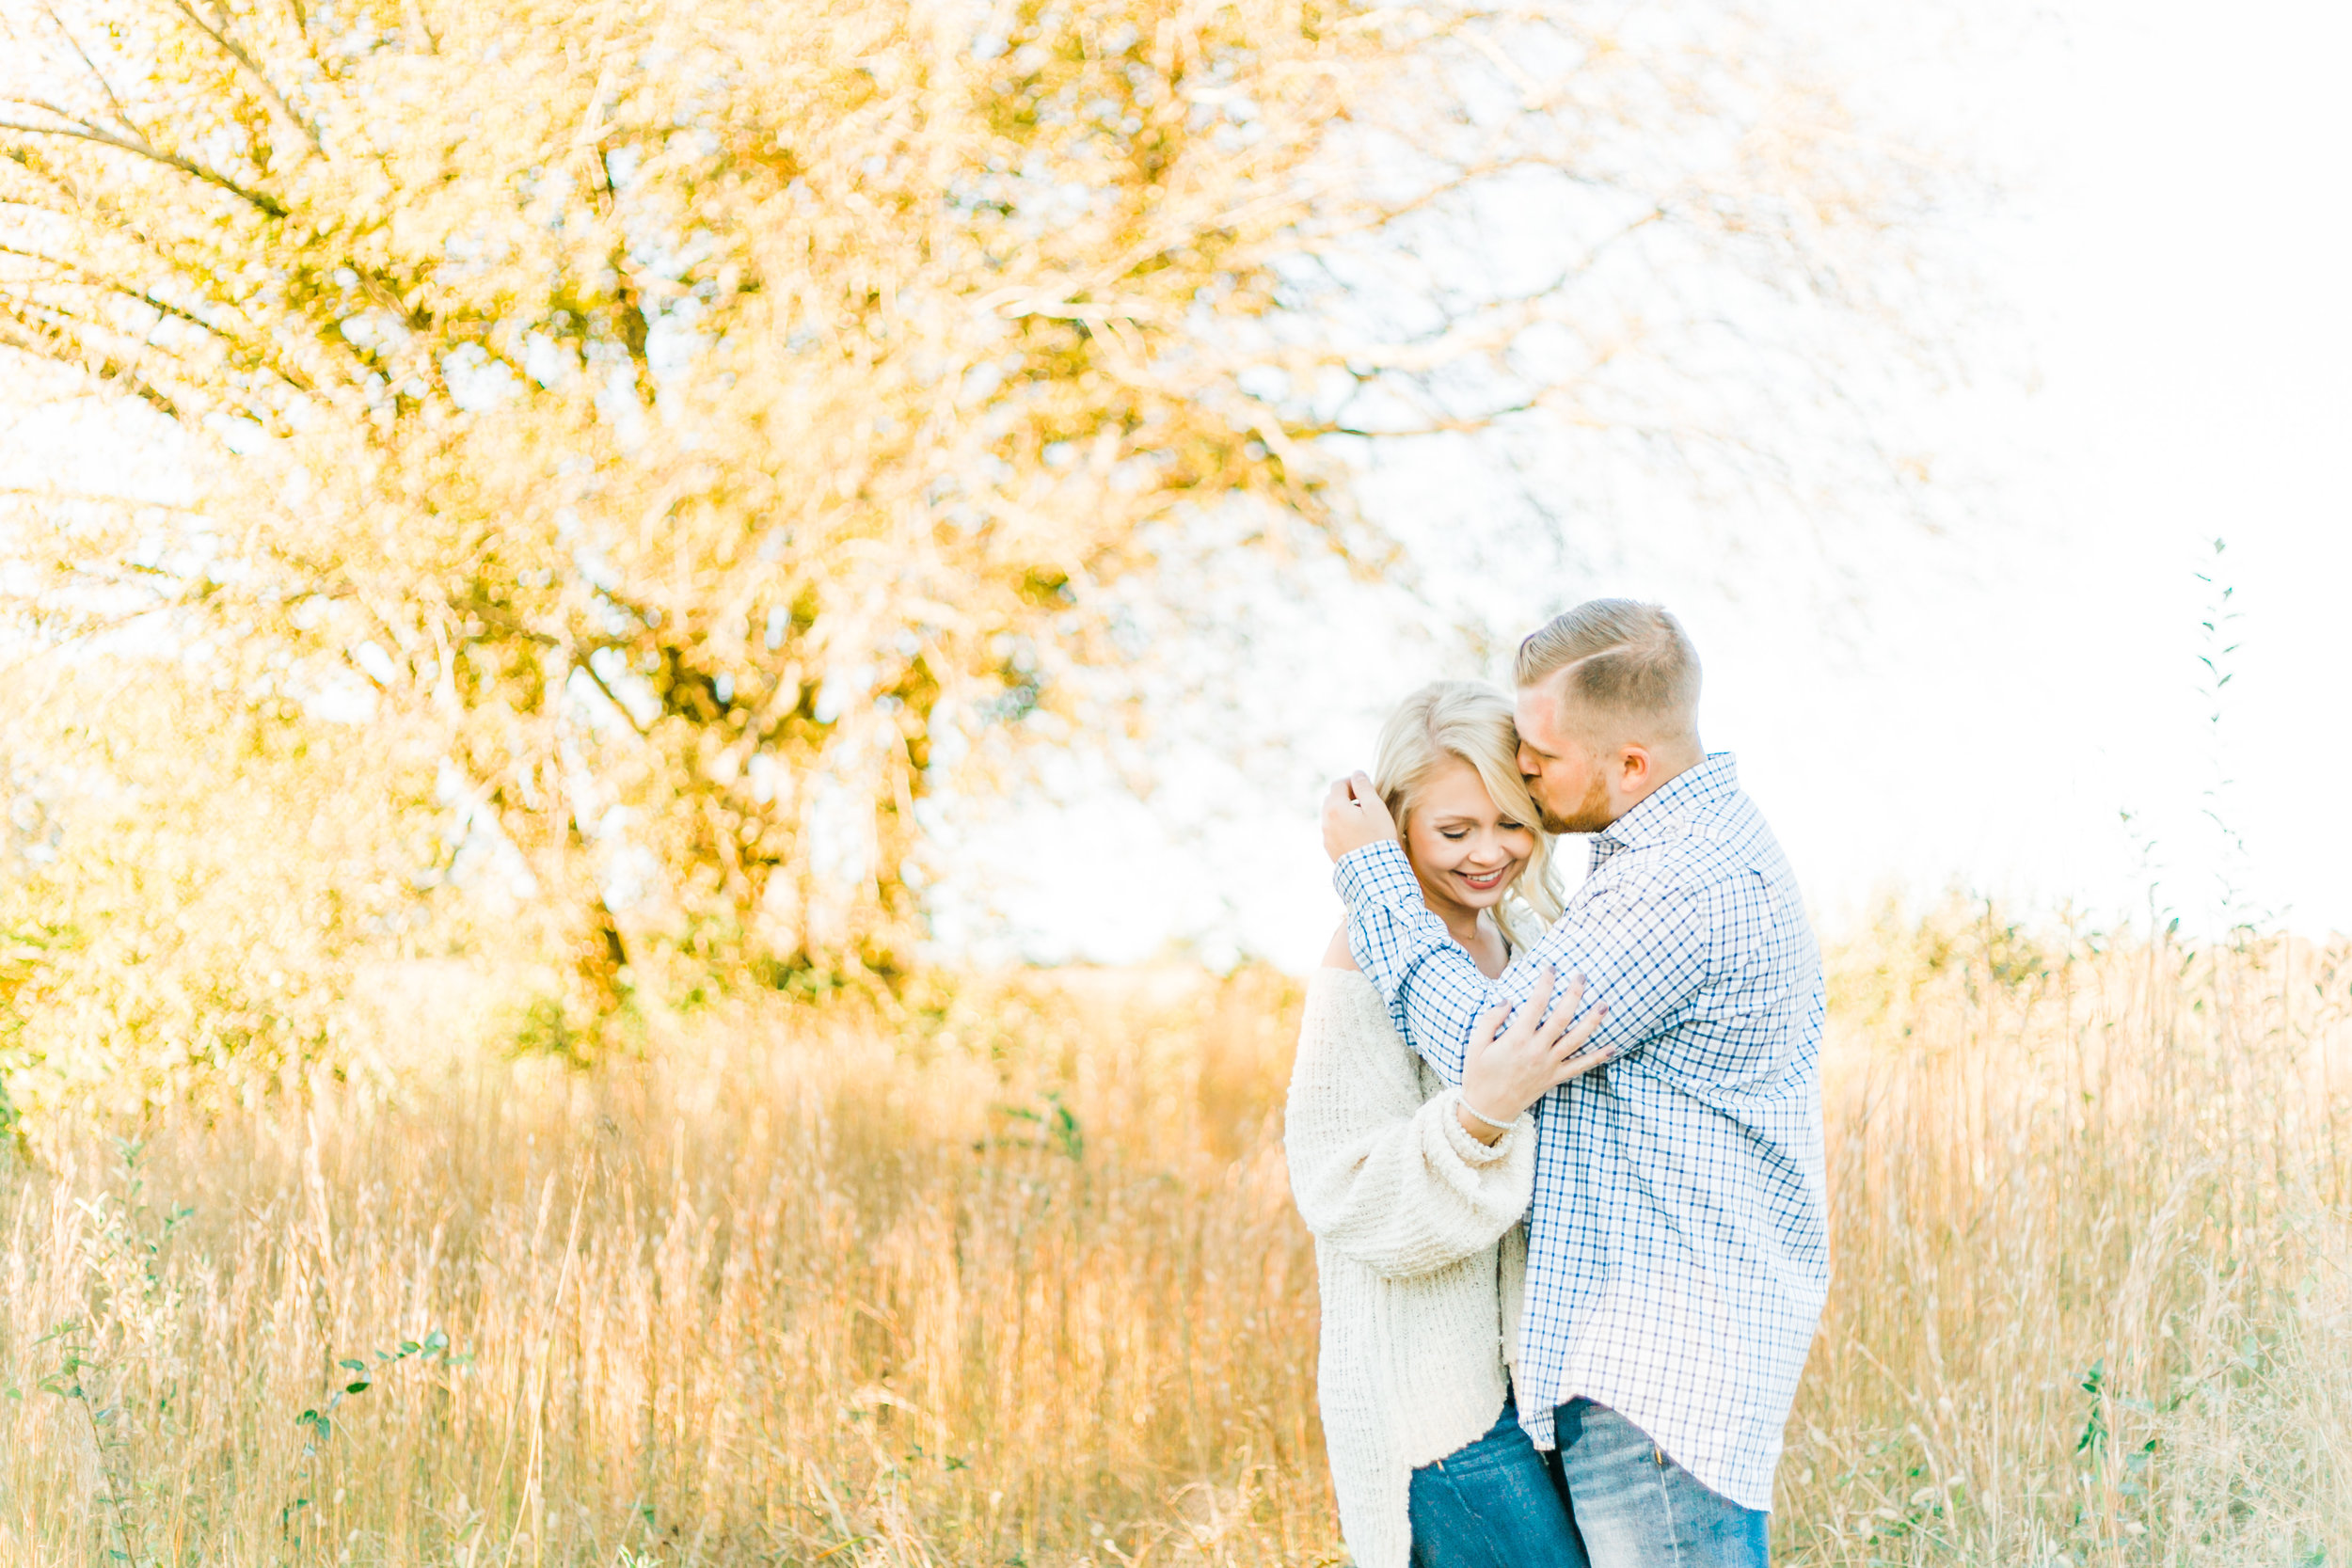 engagement photos at melton hill park in fall